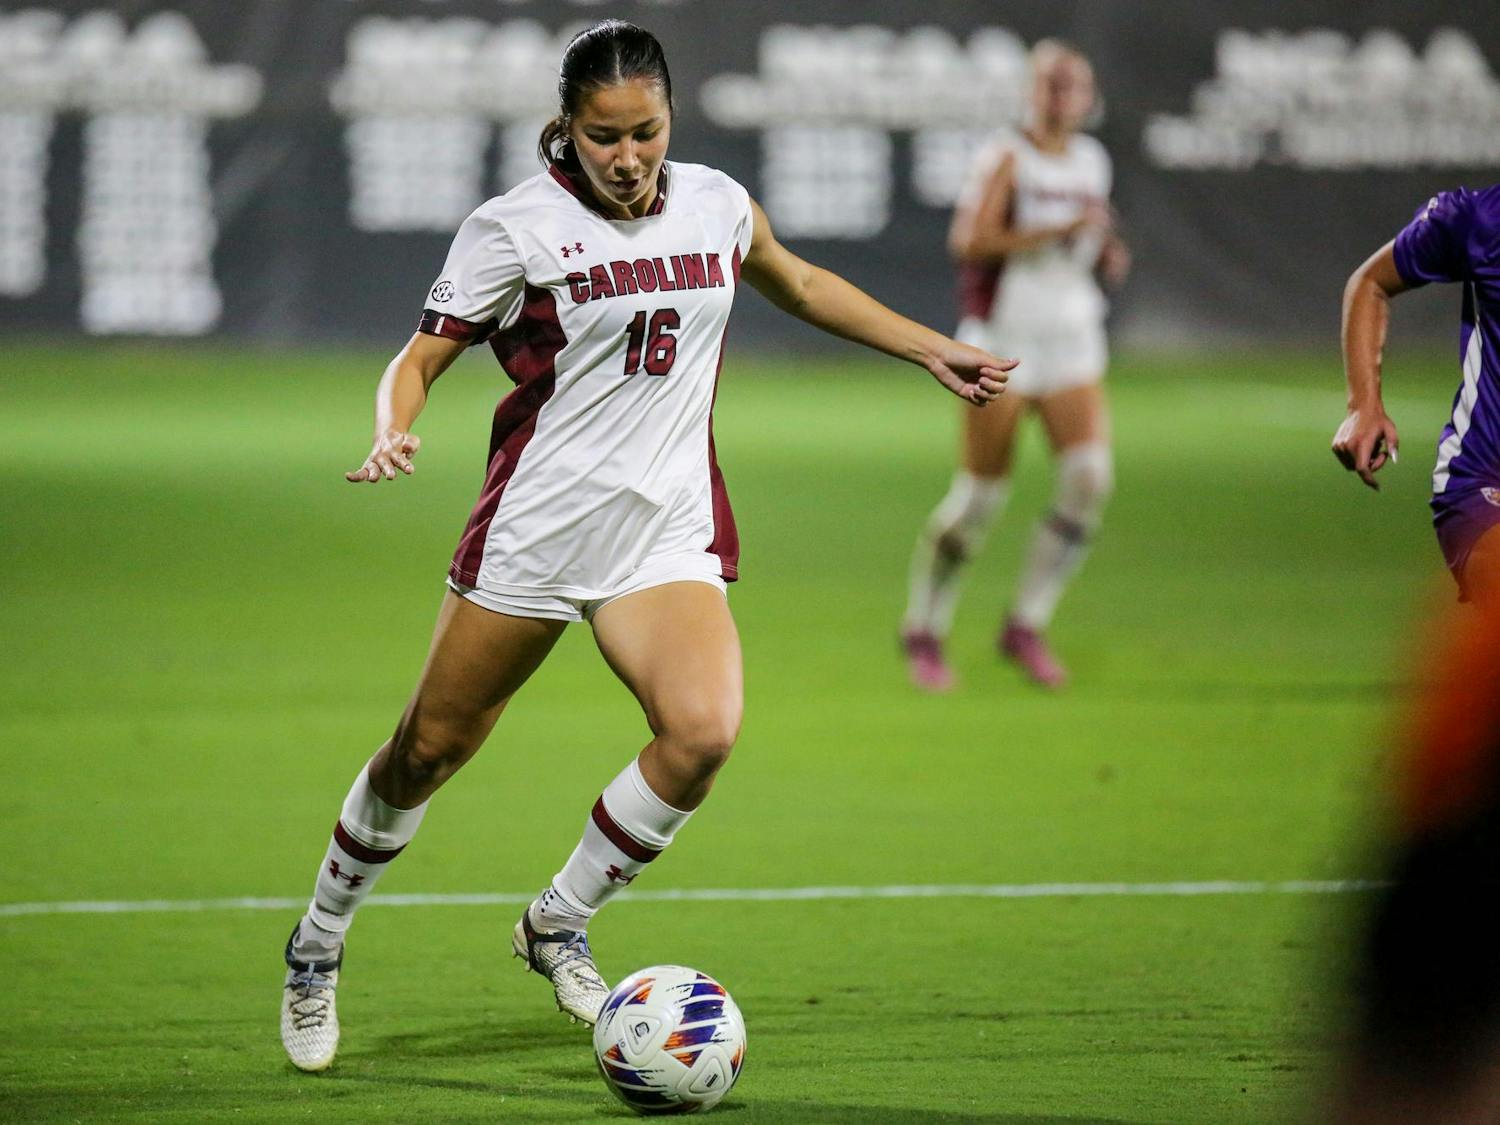 Freshman forward and midfielder Autumn Cayelli carries the ball during South Carolina’s match against LSU at Stone Stadium on Oct. 5, 2023. The Gamecocks beat the Tigers 1-0.